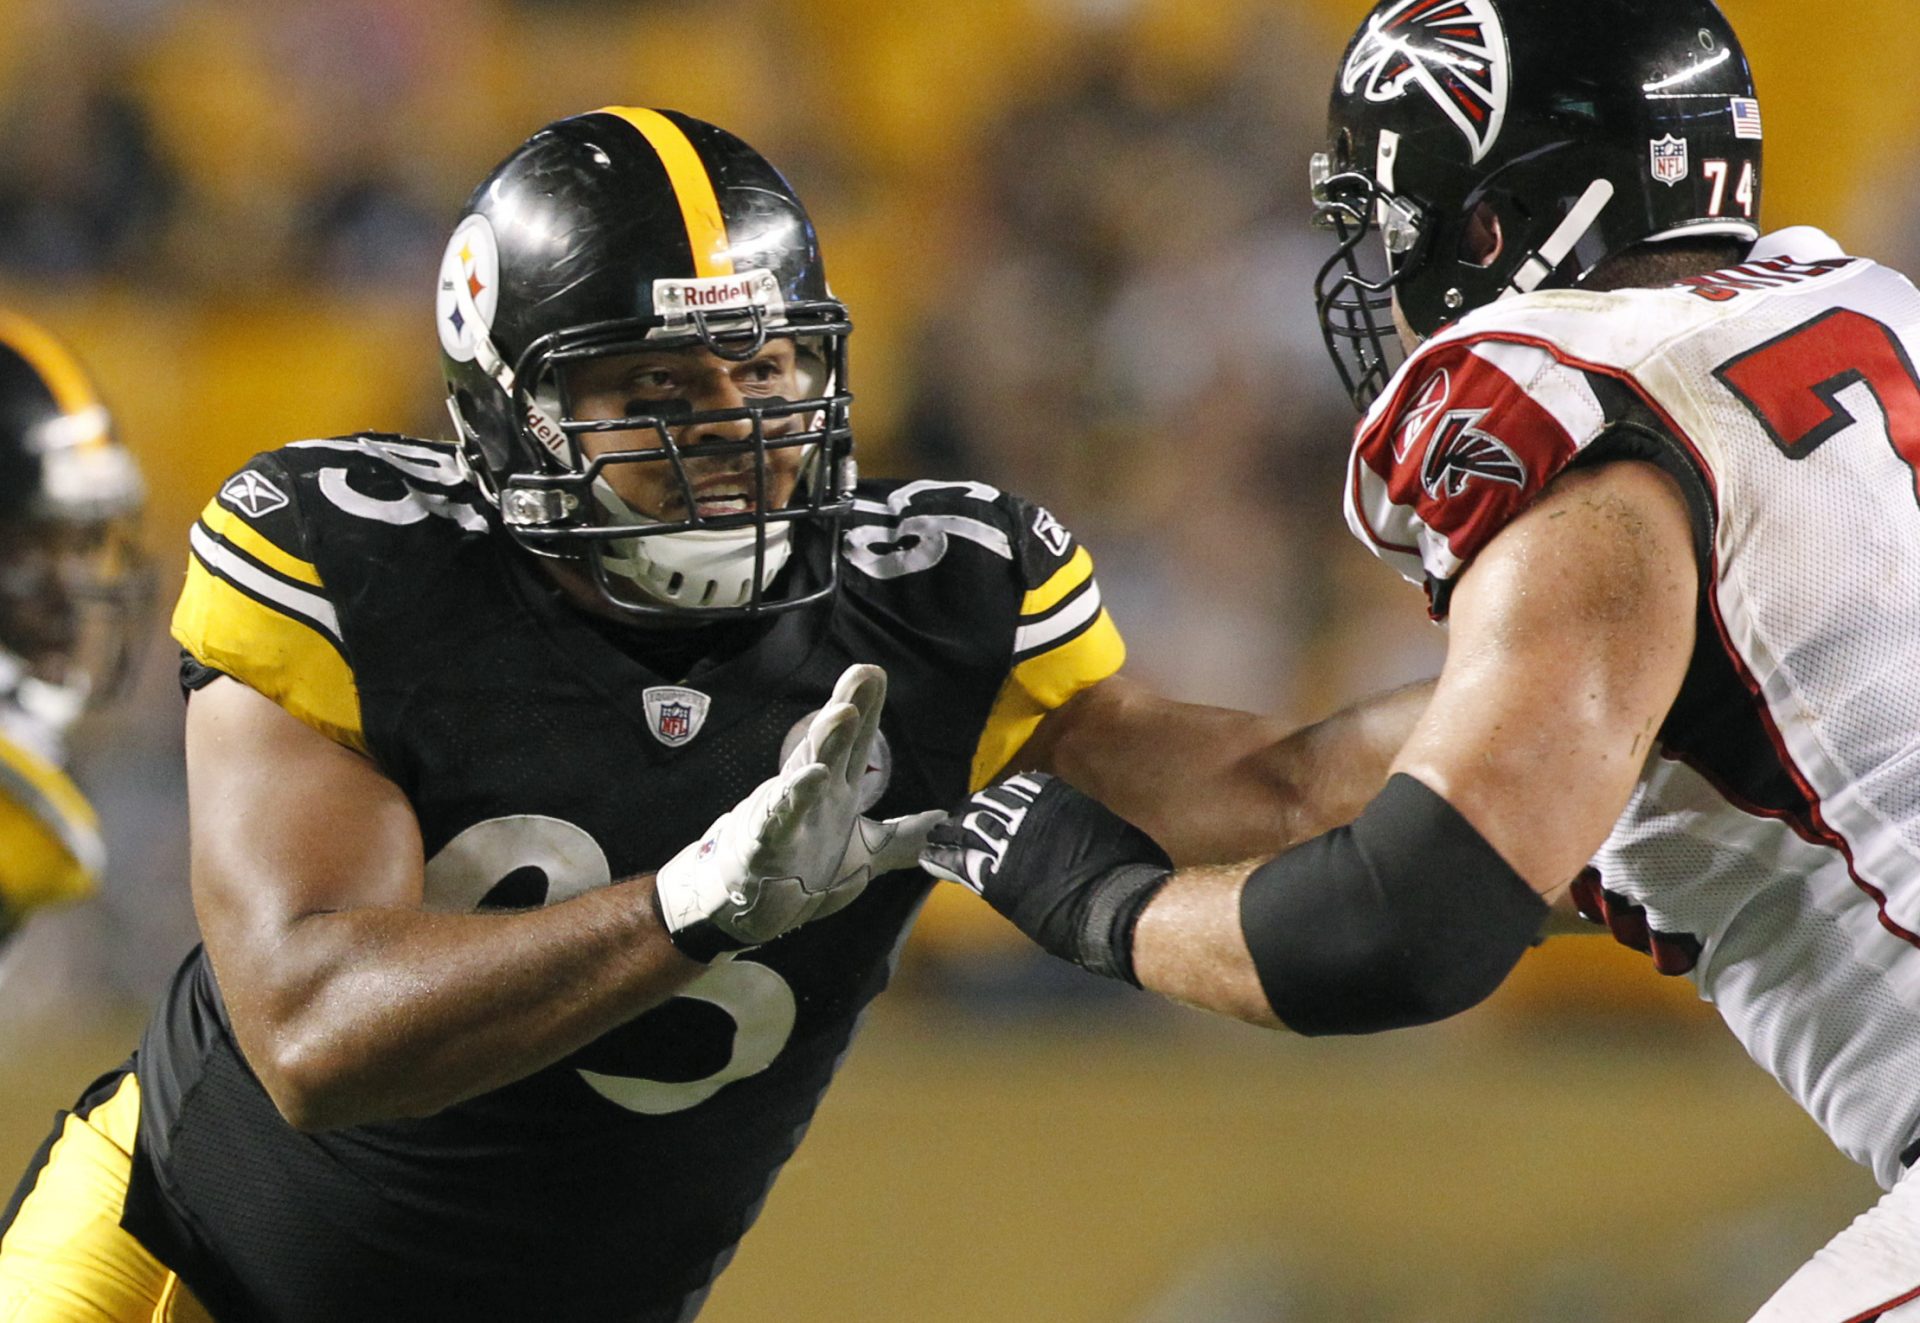 FILE - In this Aug. 27, 2011, file photo, Pittsburgh Steelers defensive end Cameron Heyward (95) plays in a preseason NFL football game against the Atlanta Falcons, in Pittsburgh.